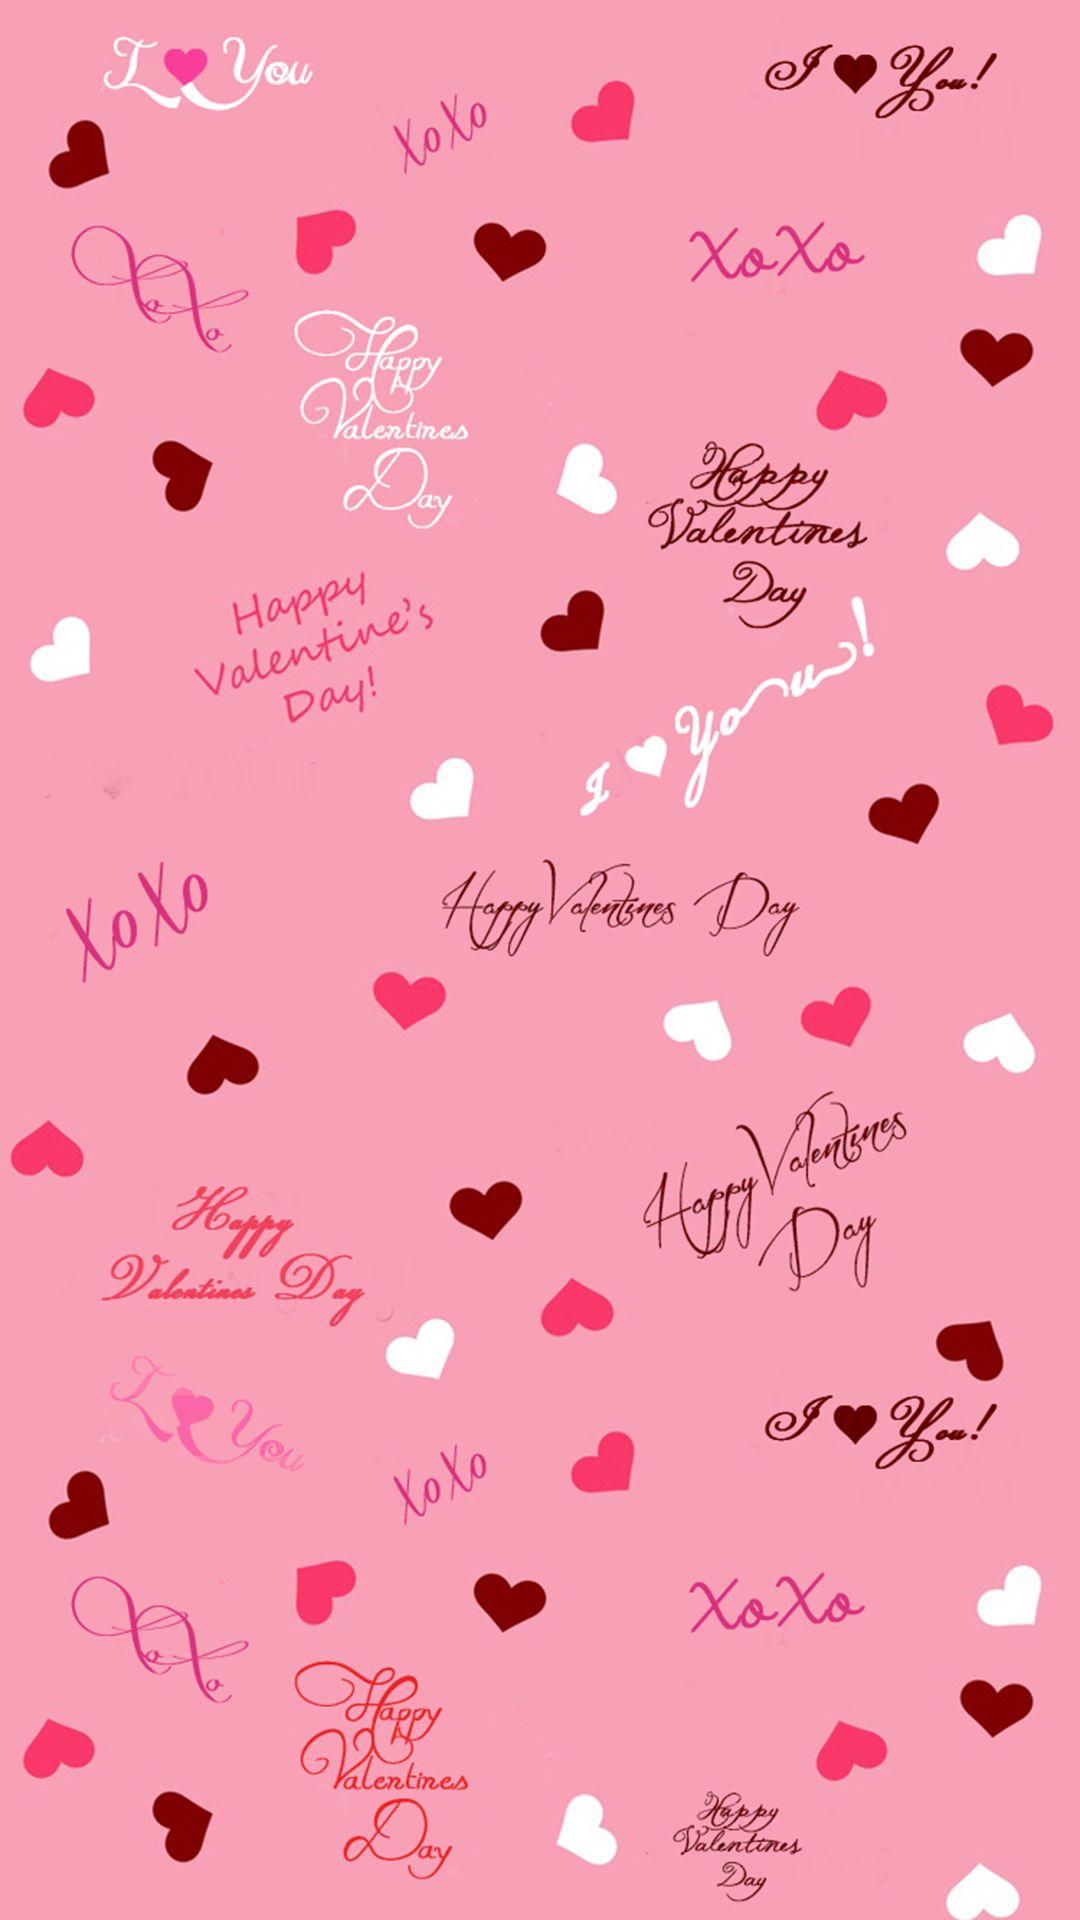 67 Valentines Day Background Images  WallpaperSafari